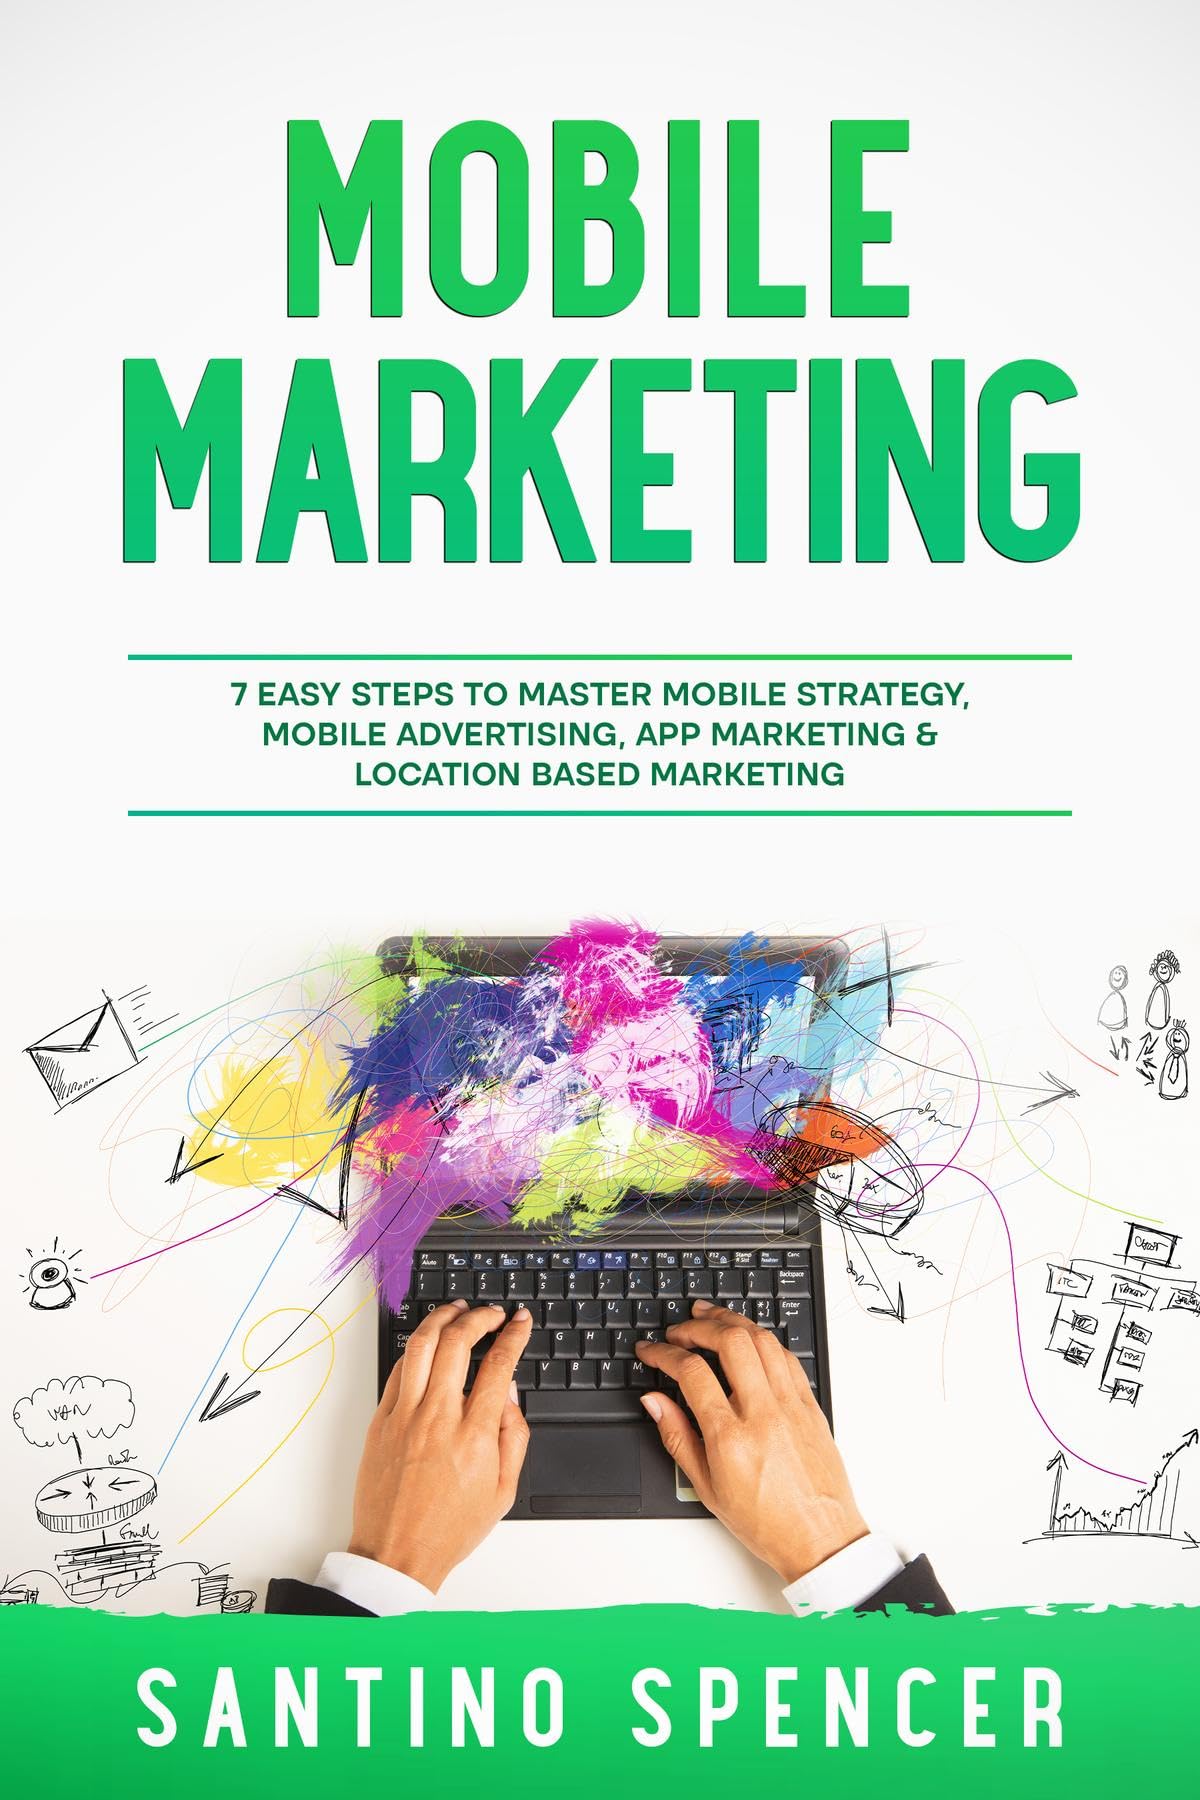 Mobile Marketing: 7 Easy Steps to Master Mobile Strategy, Mobile Advertising, App Marketing & Location Based Marketing (Marketing Management Book 8)